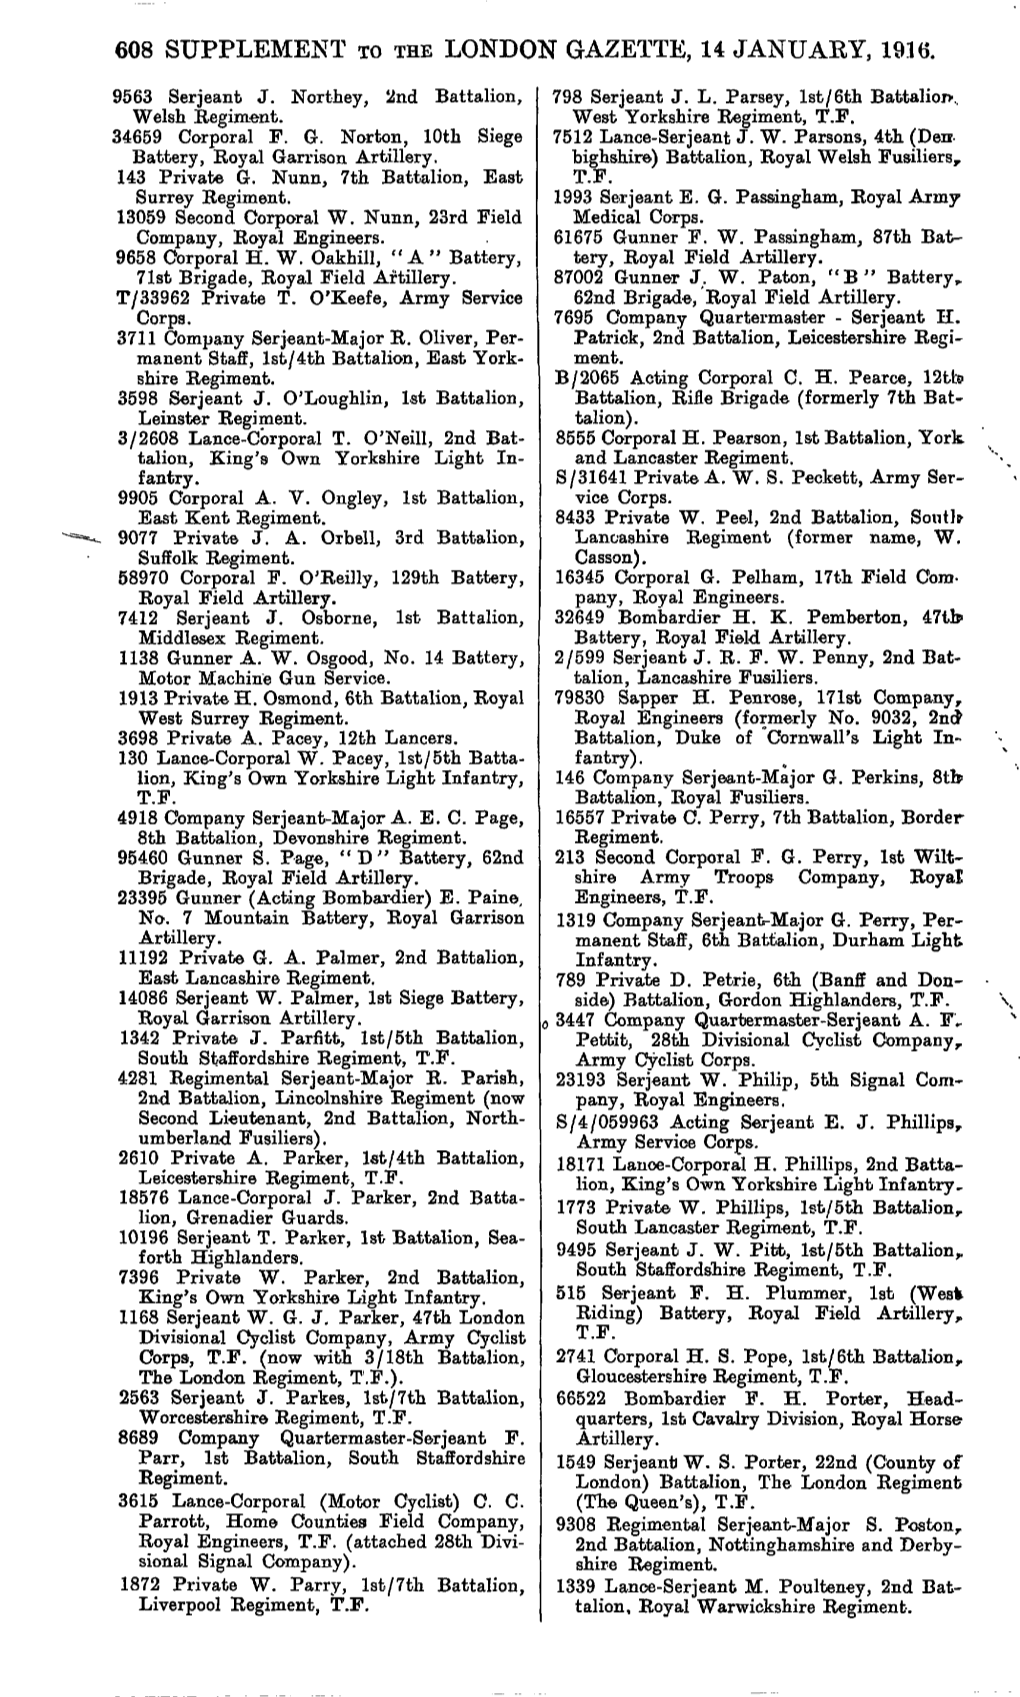 608 Supplement to the London Gazette, 14 January, 191(5